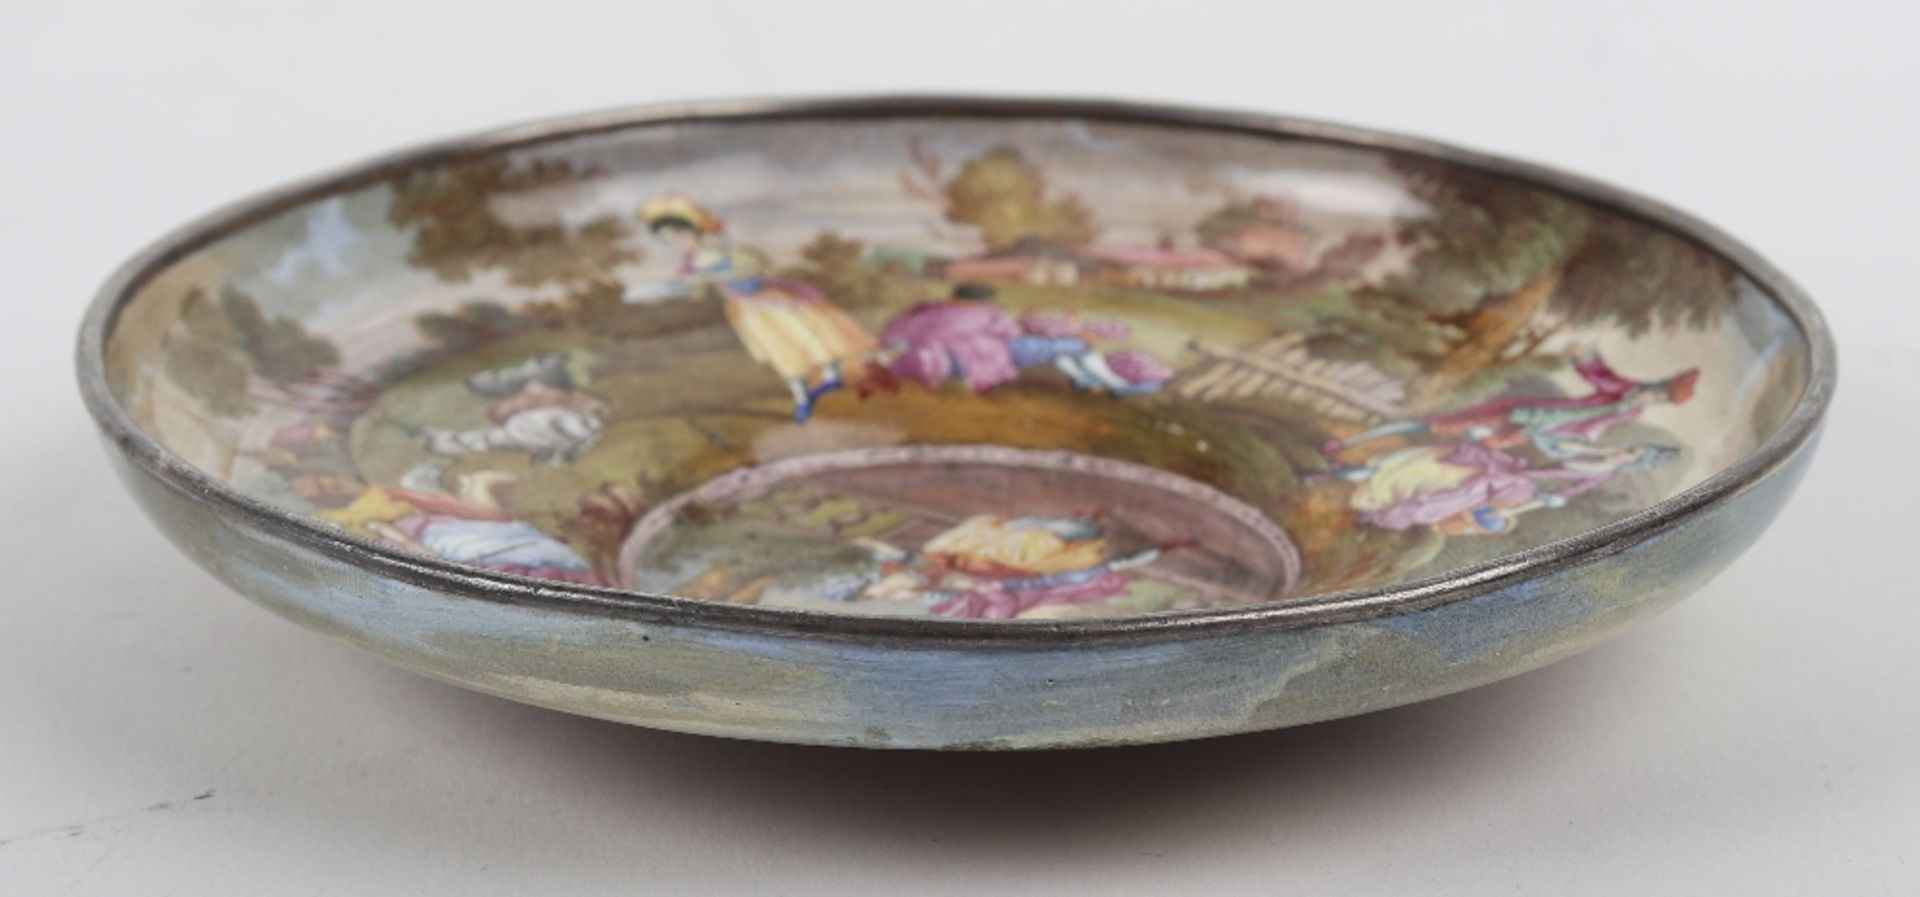 A 19th century Viennese enamel plate, c.1880 - Image 5 of 5